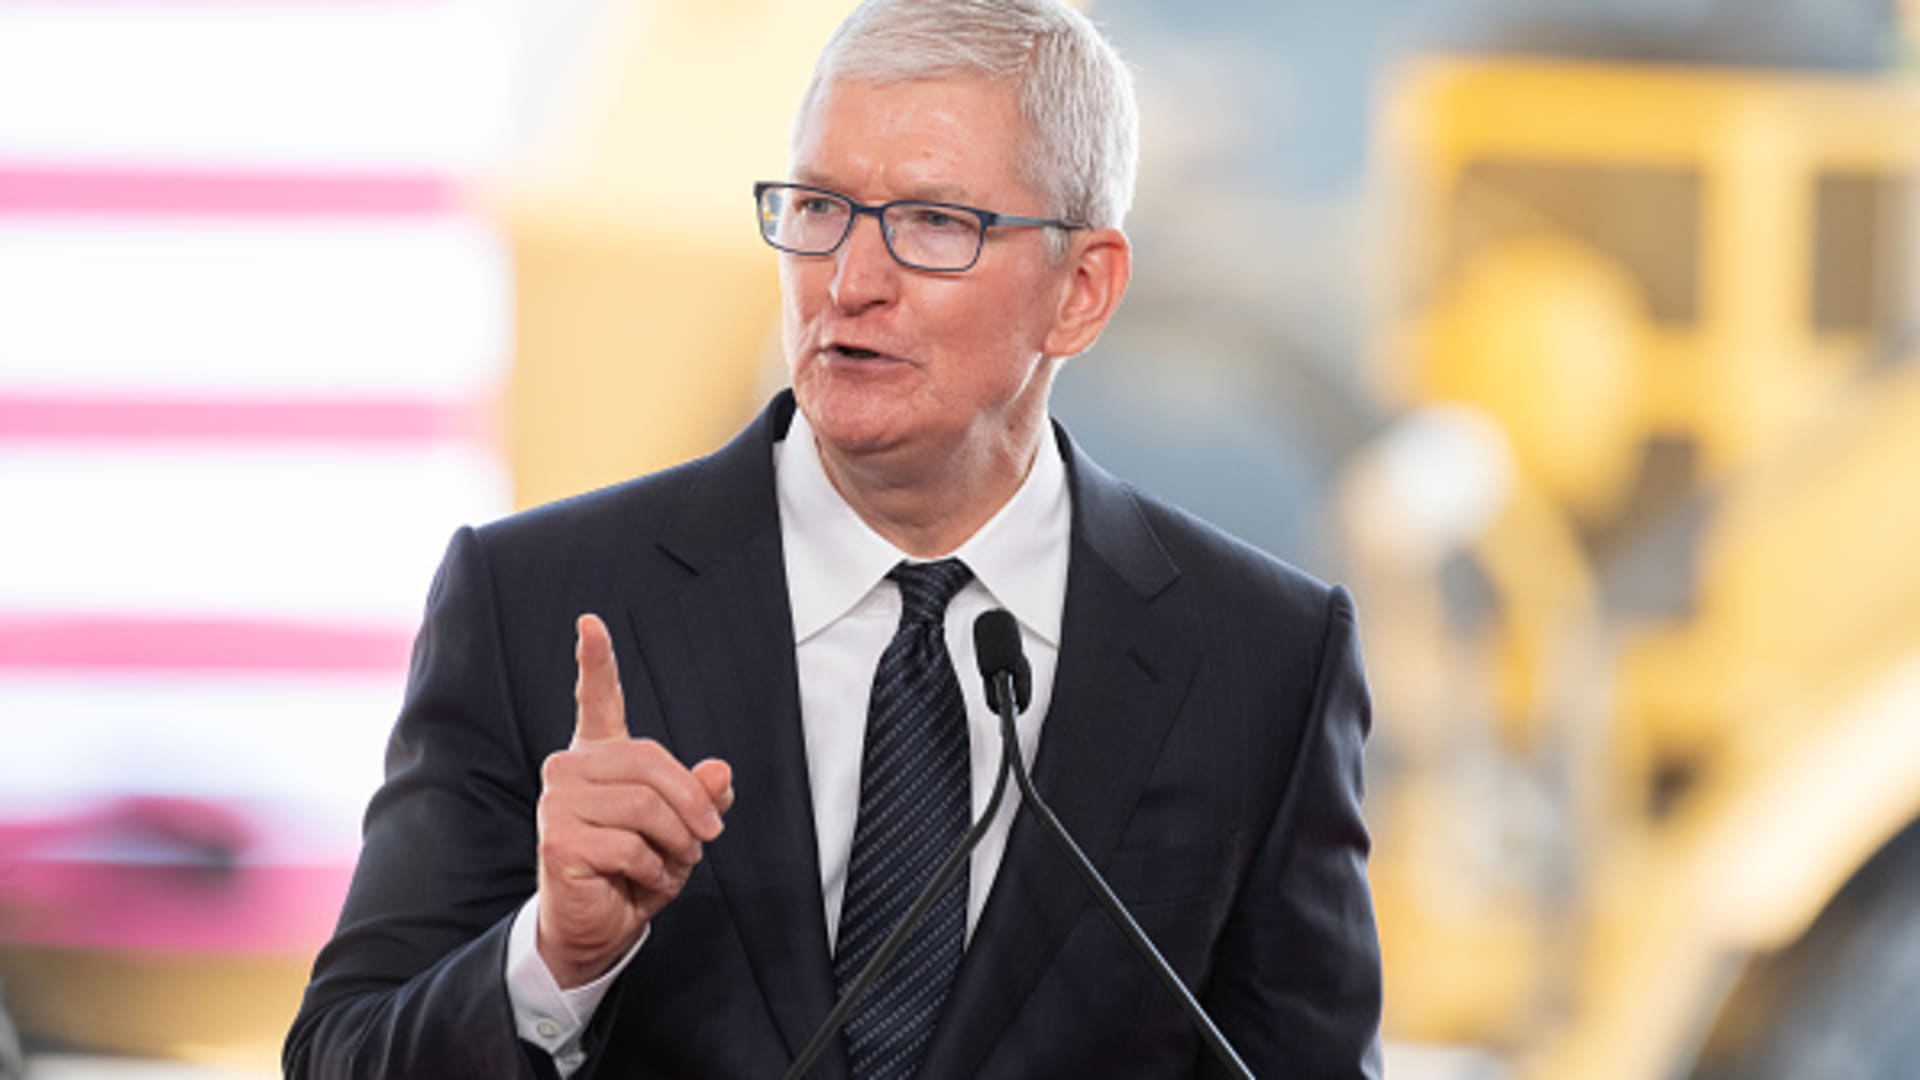 Apple CEO Tim Cook requests and receives a 40% pay cut after shareholder vote